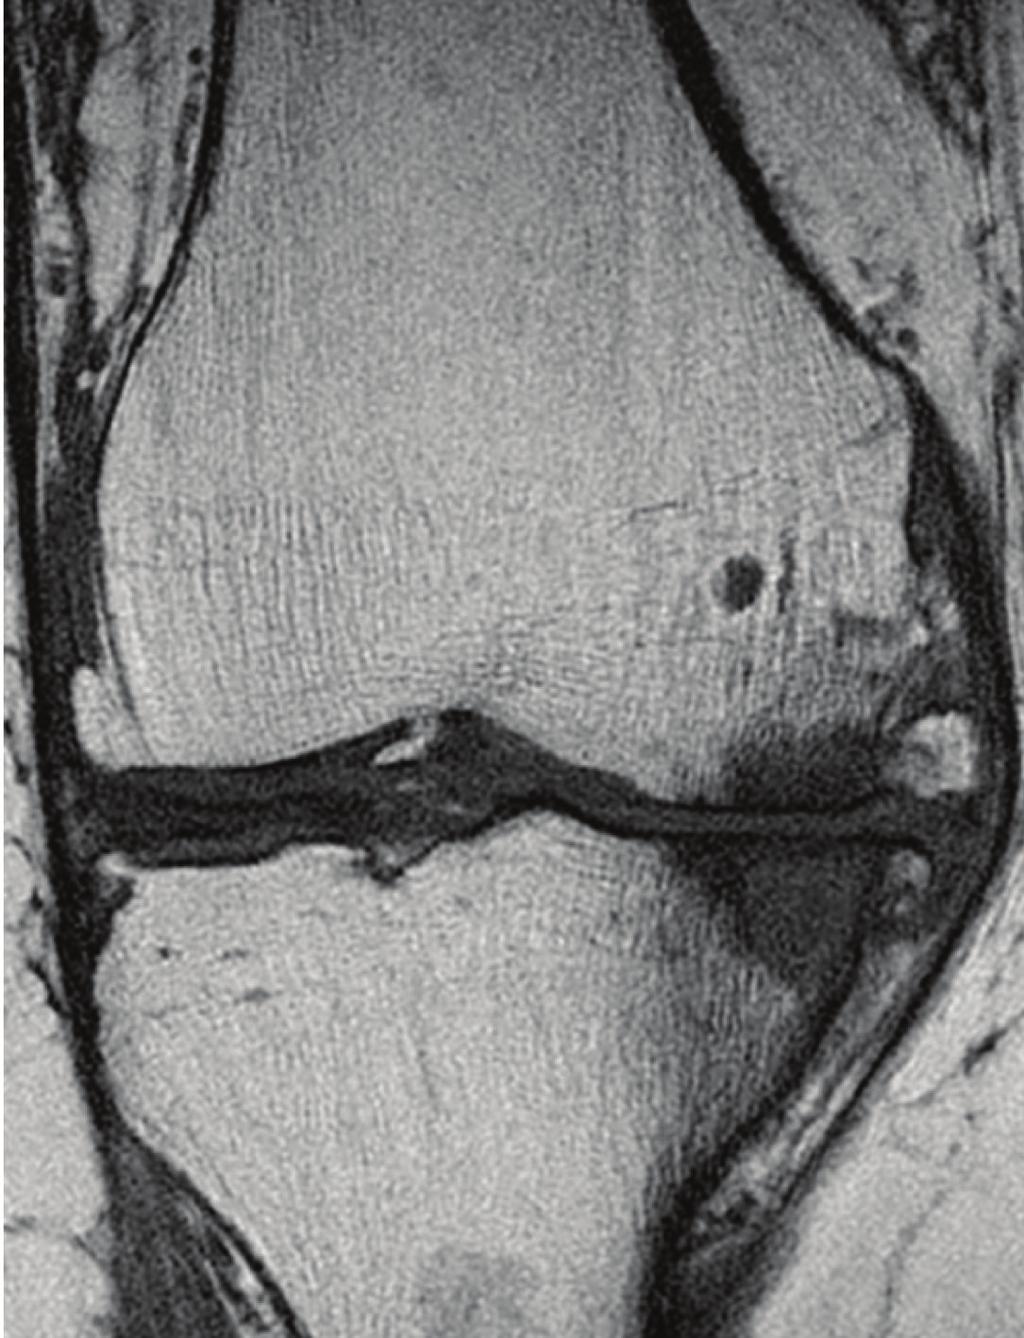 4 Case Reports in Orthopedics (a) (b) (c) Figure 3: (a) Coronal T1 MRI with contrast image in painful knee OA patient showing large